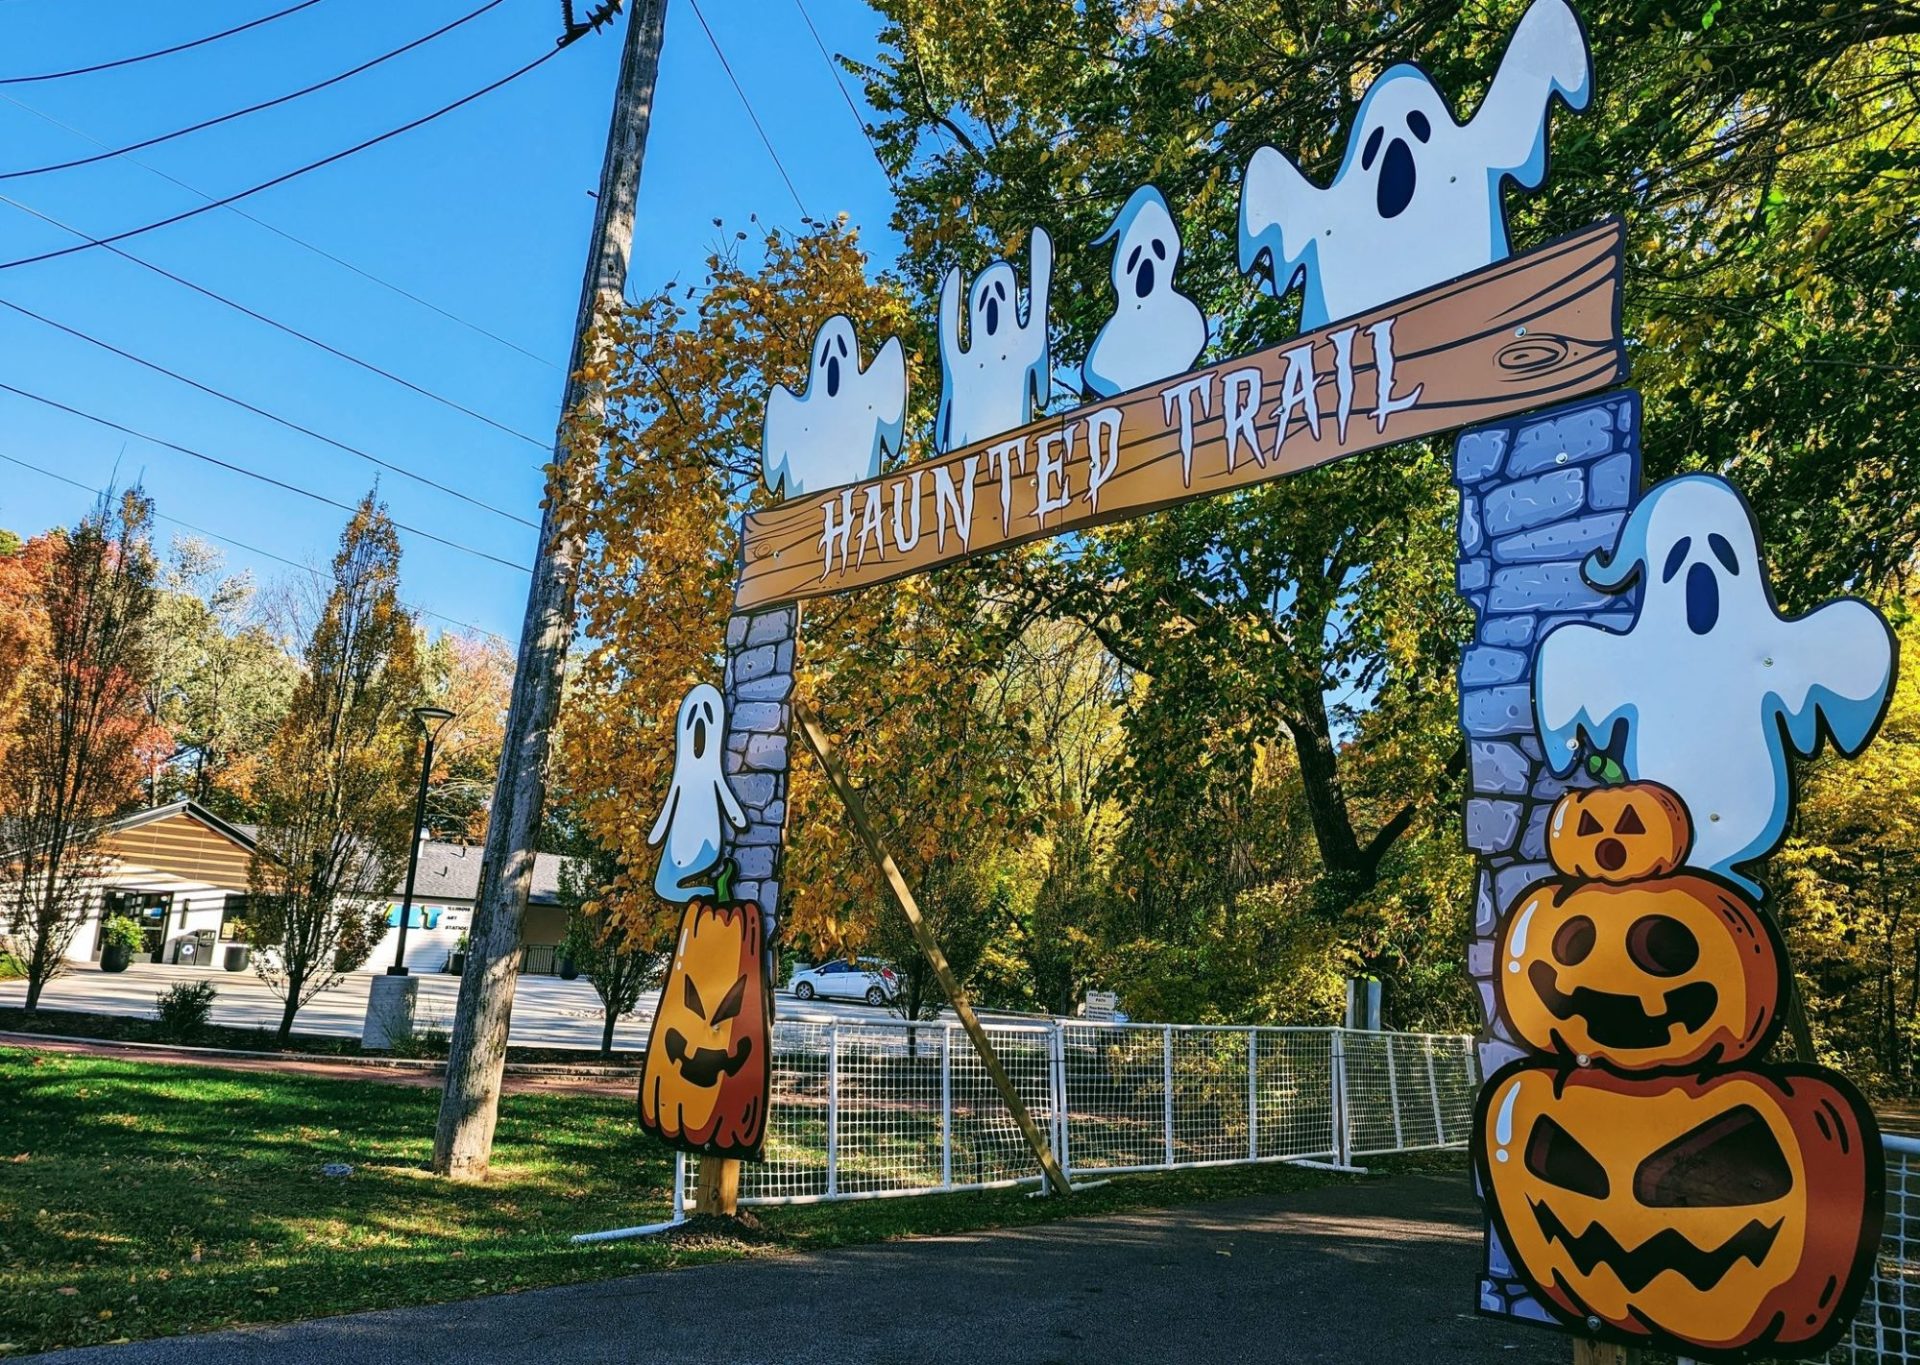 Entrance to a trail, decorated with painted ghosts and jack-o-lanterns.